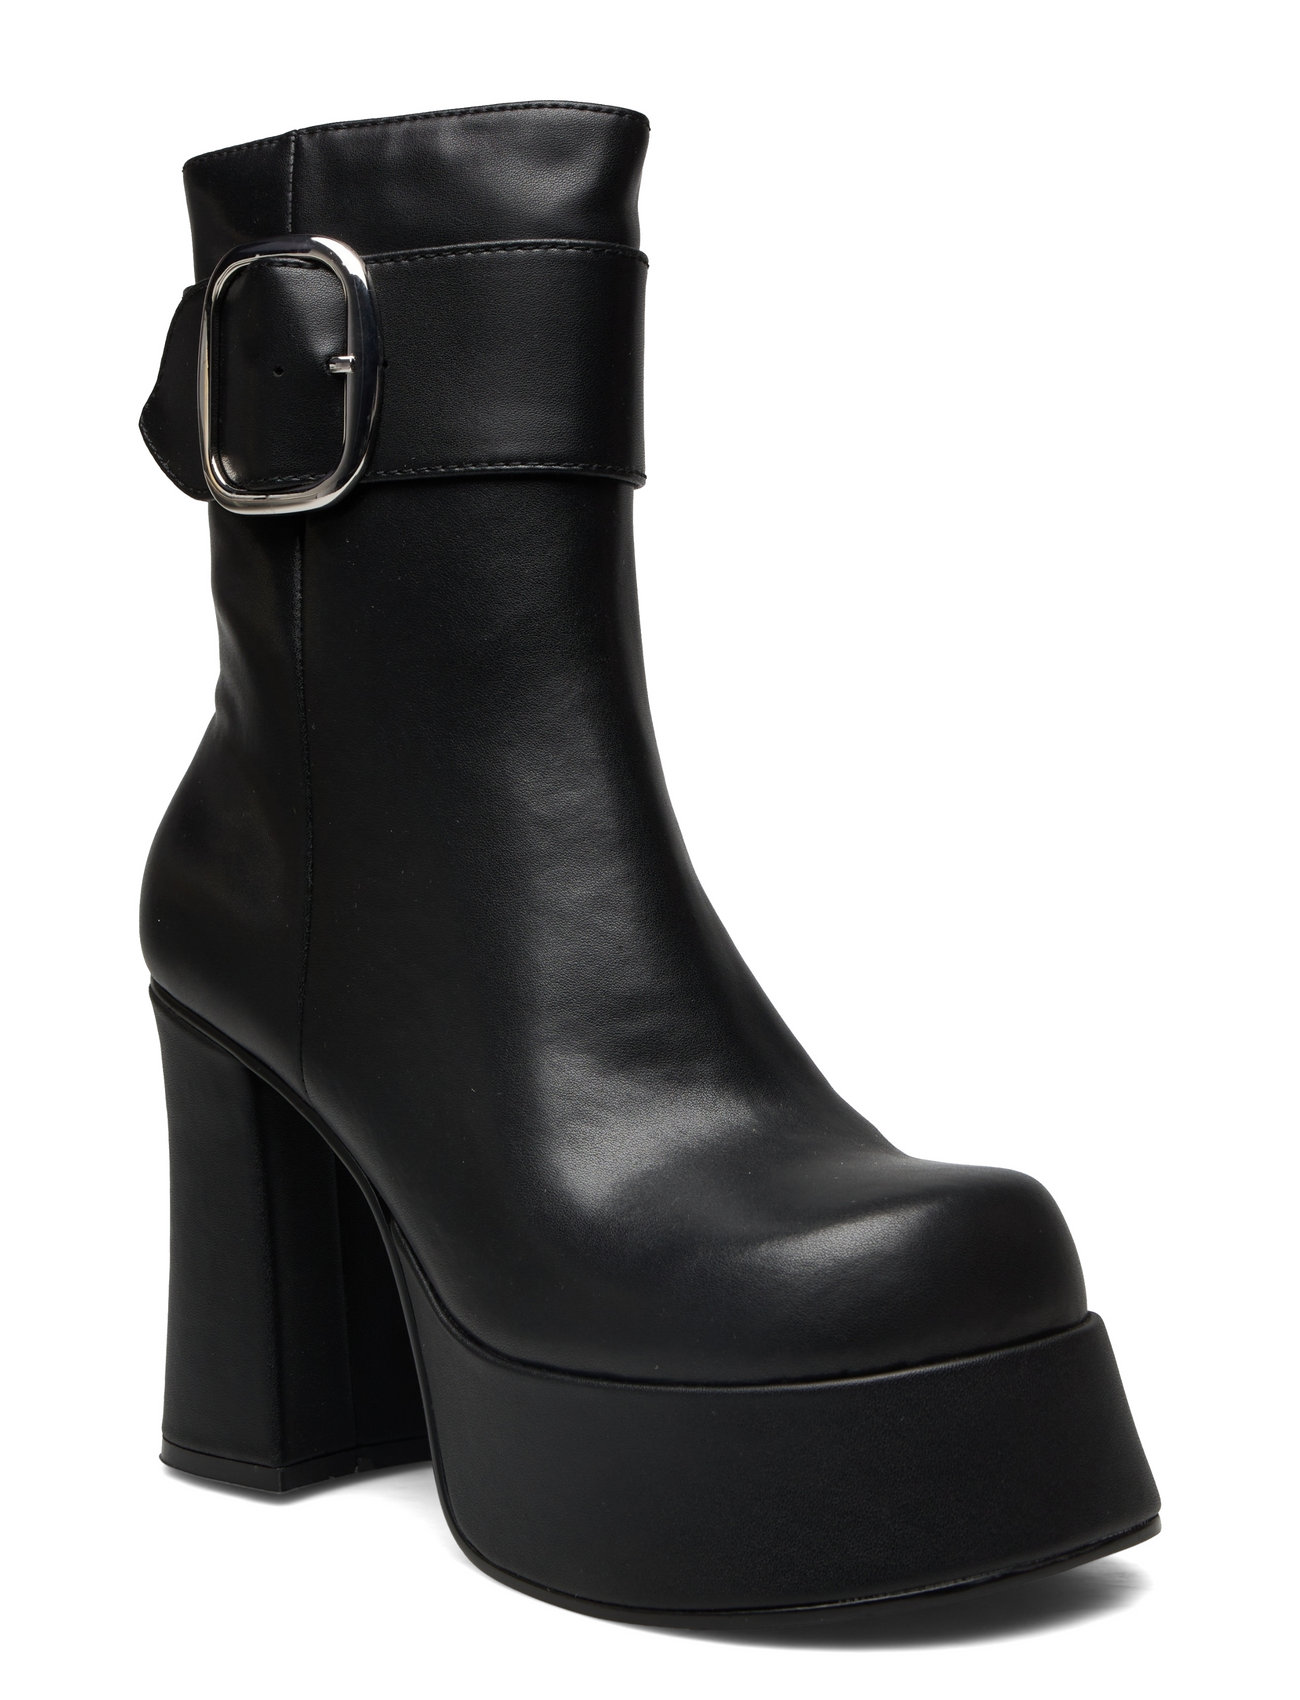 Siren Bootie Shoes Boots Ankle Boots Ankle Boots With Heel Black Steve Madden